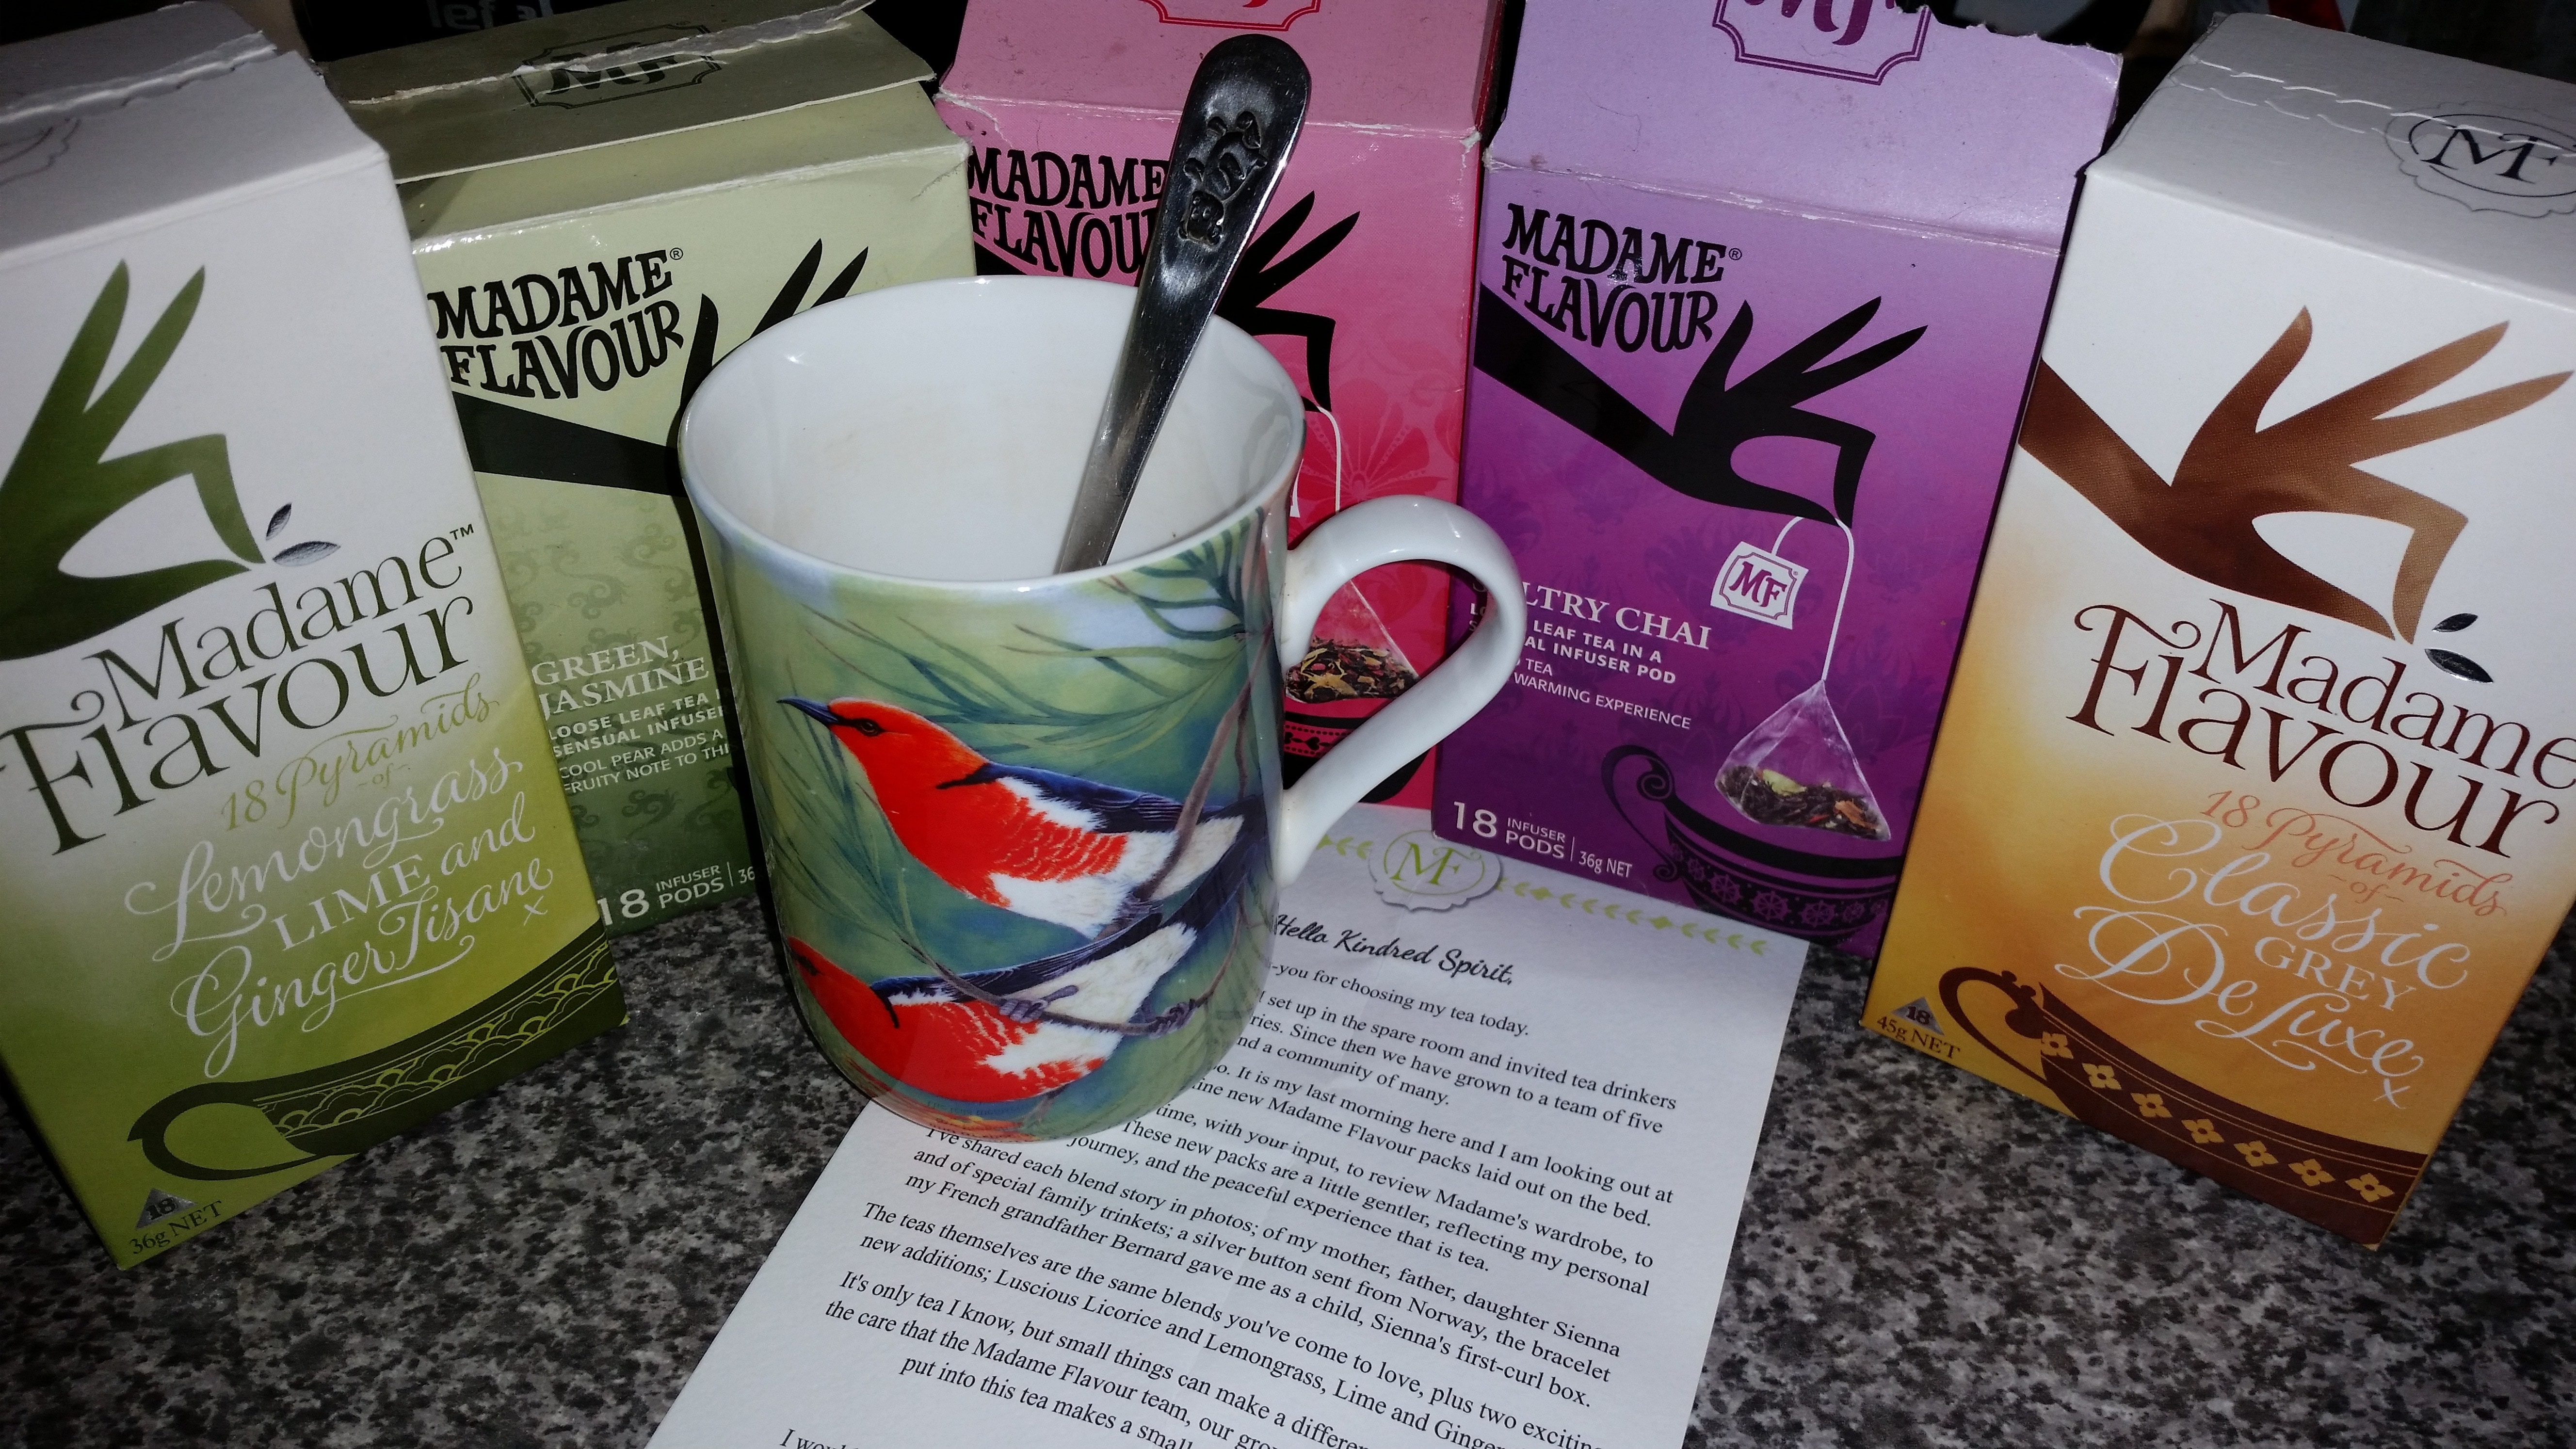 white and green bird print ceramic mug with spoon near five madame flavour boxes